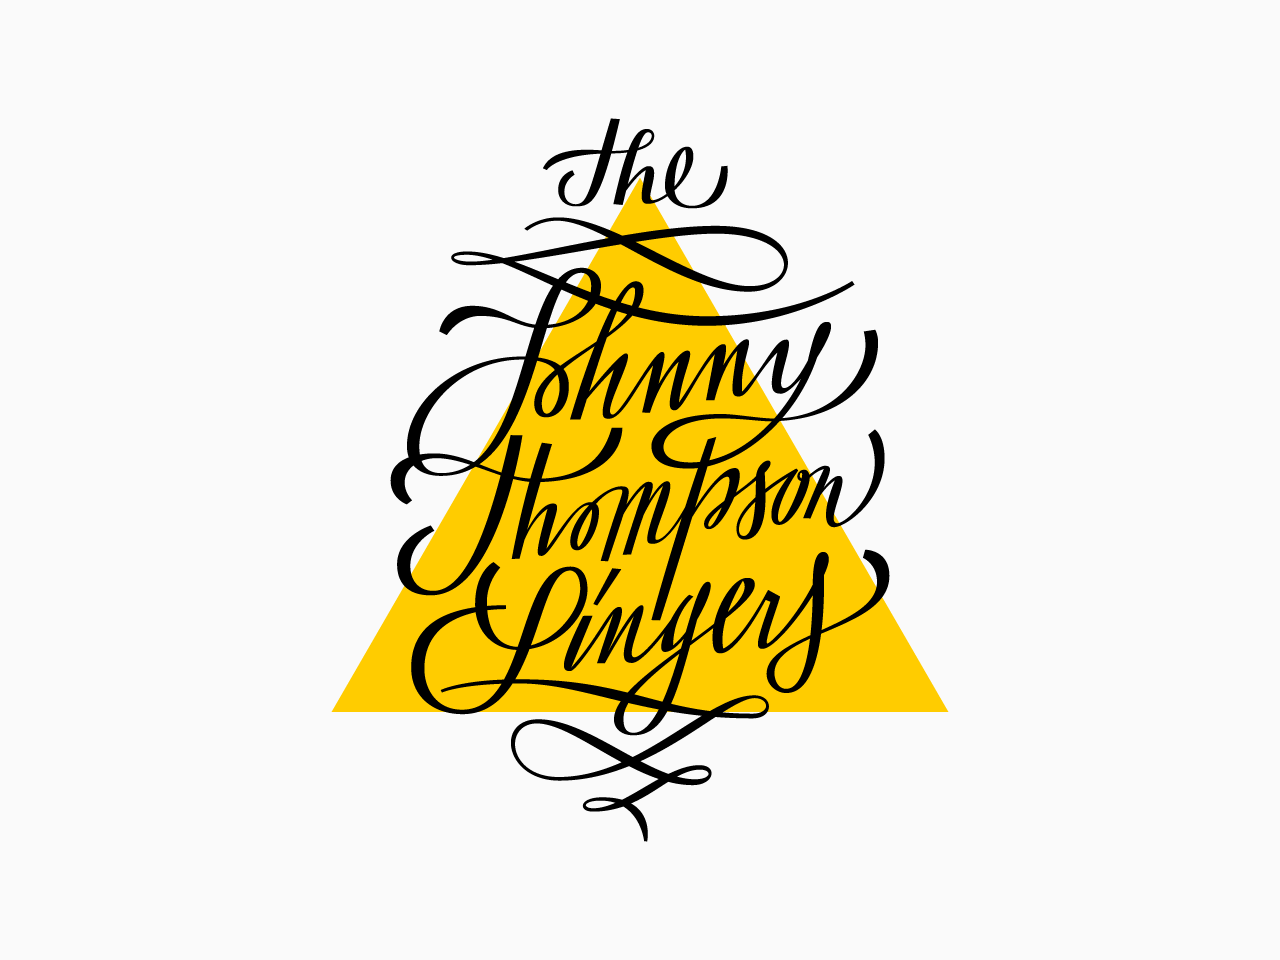 Lettering: The Johnny Thompson Singers